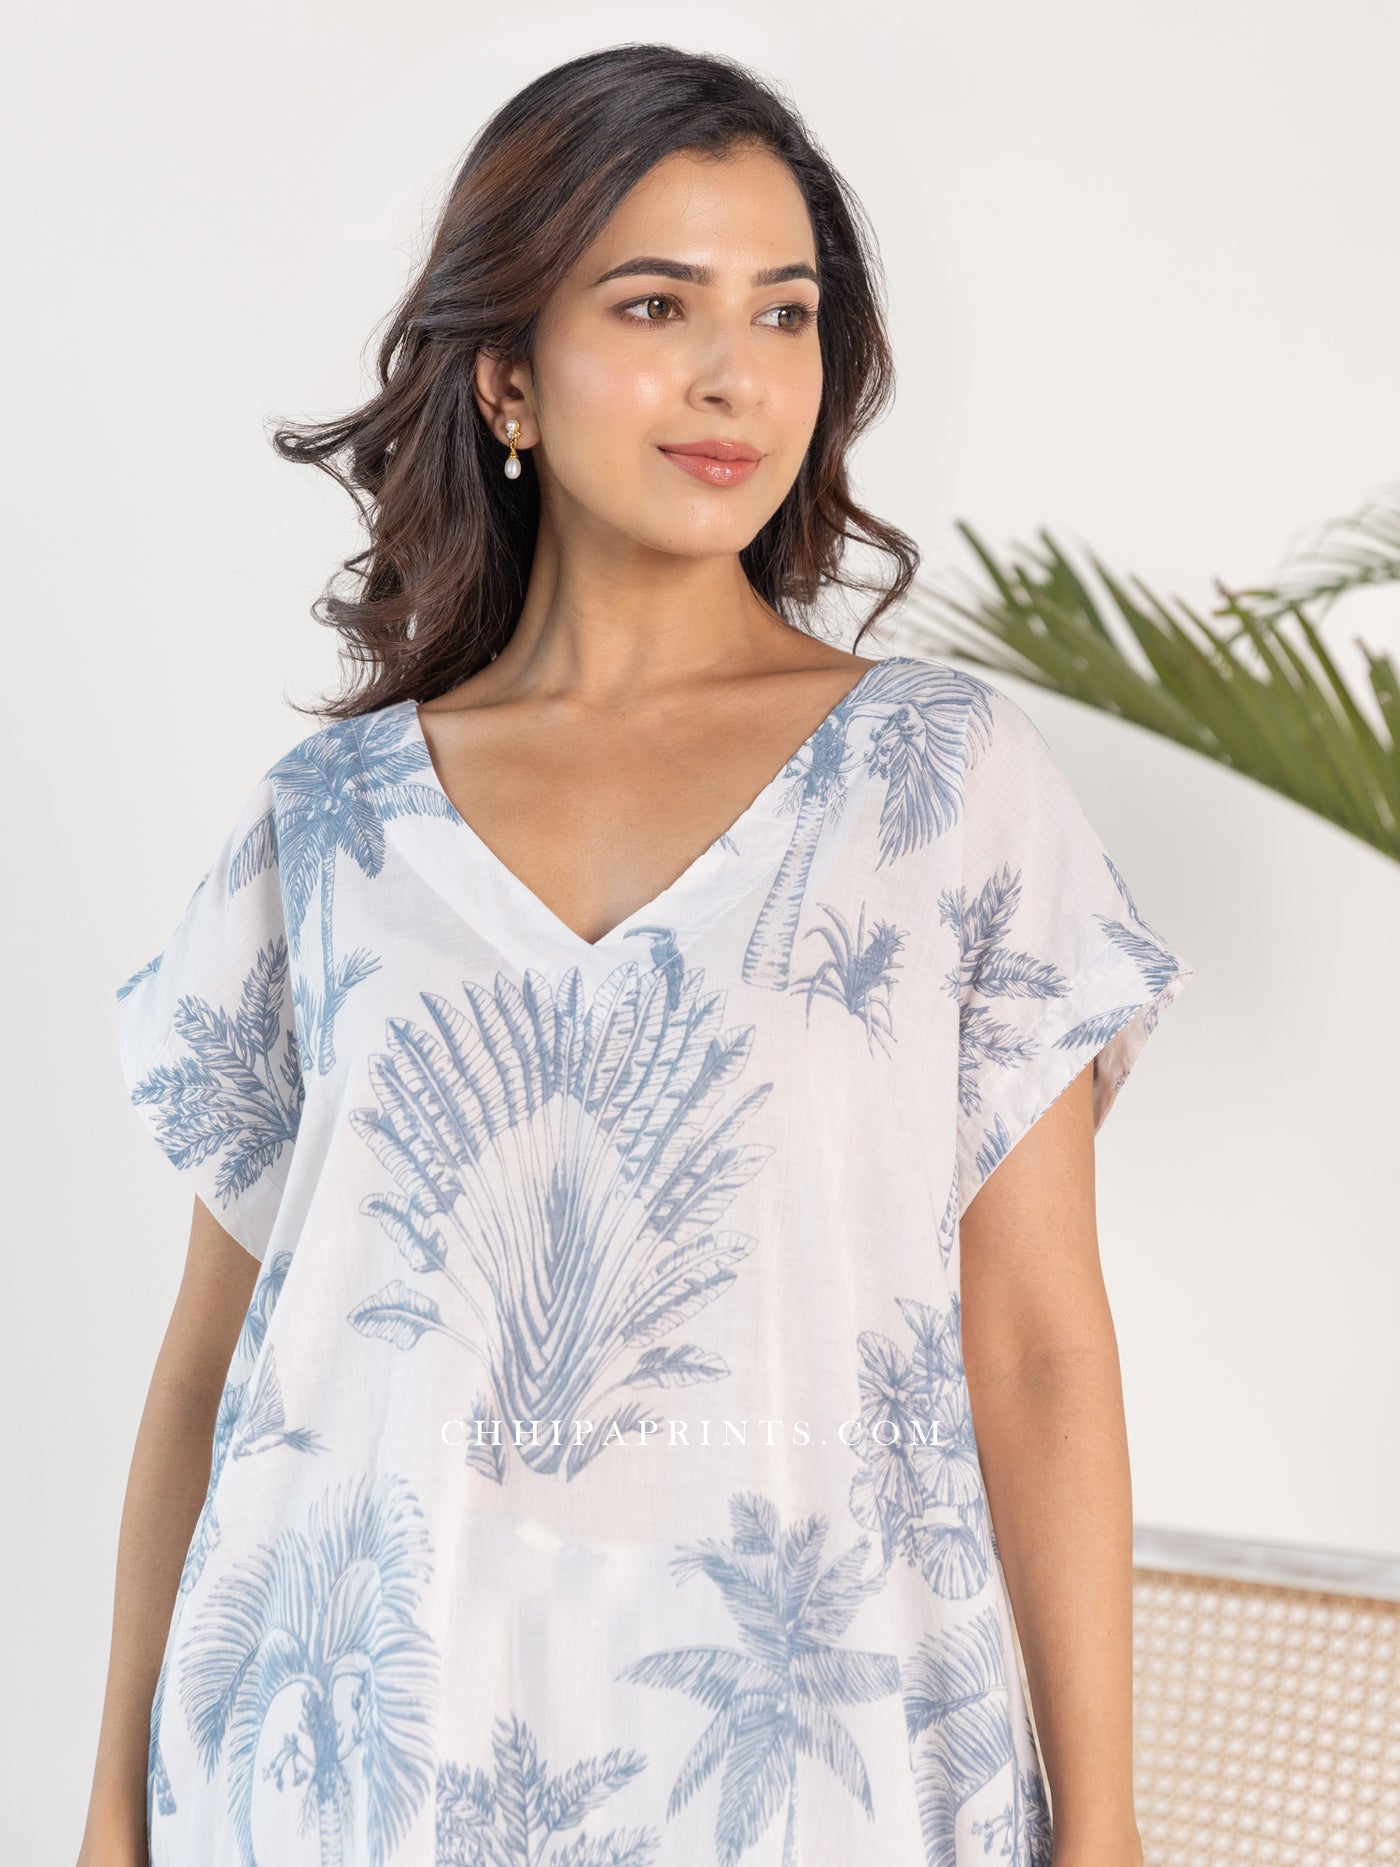 Cotton Palm Print Kaftan In Shade of Powder Blue And White